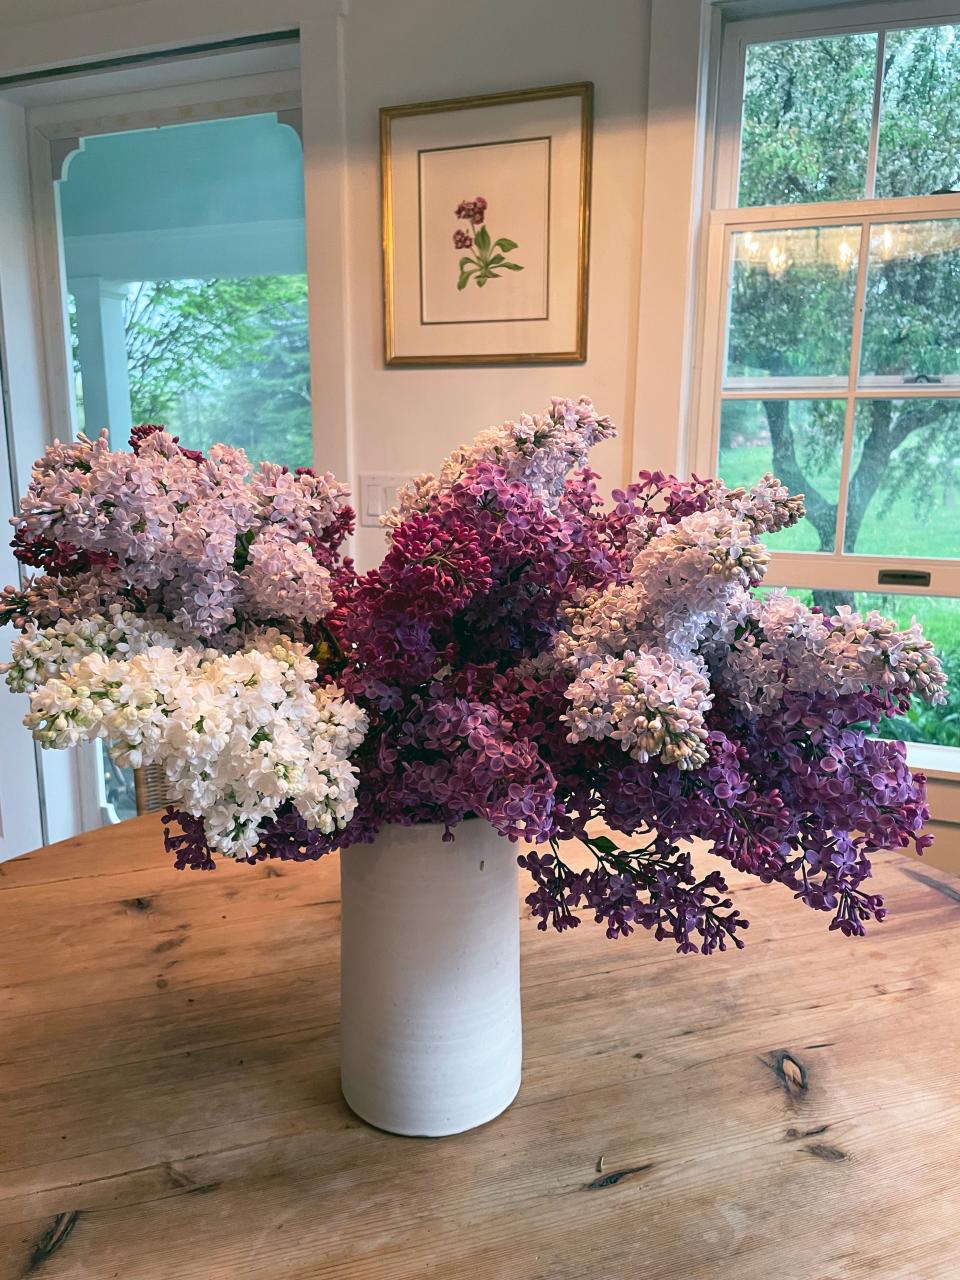 Lilacs in lavender, purple and white are displayed on the kitchen table in Carleton Varney's farmhouse in Millwood, New York.